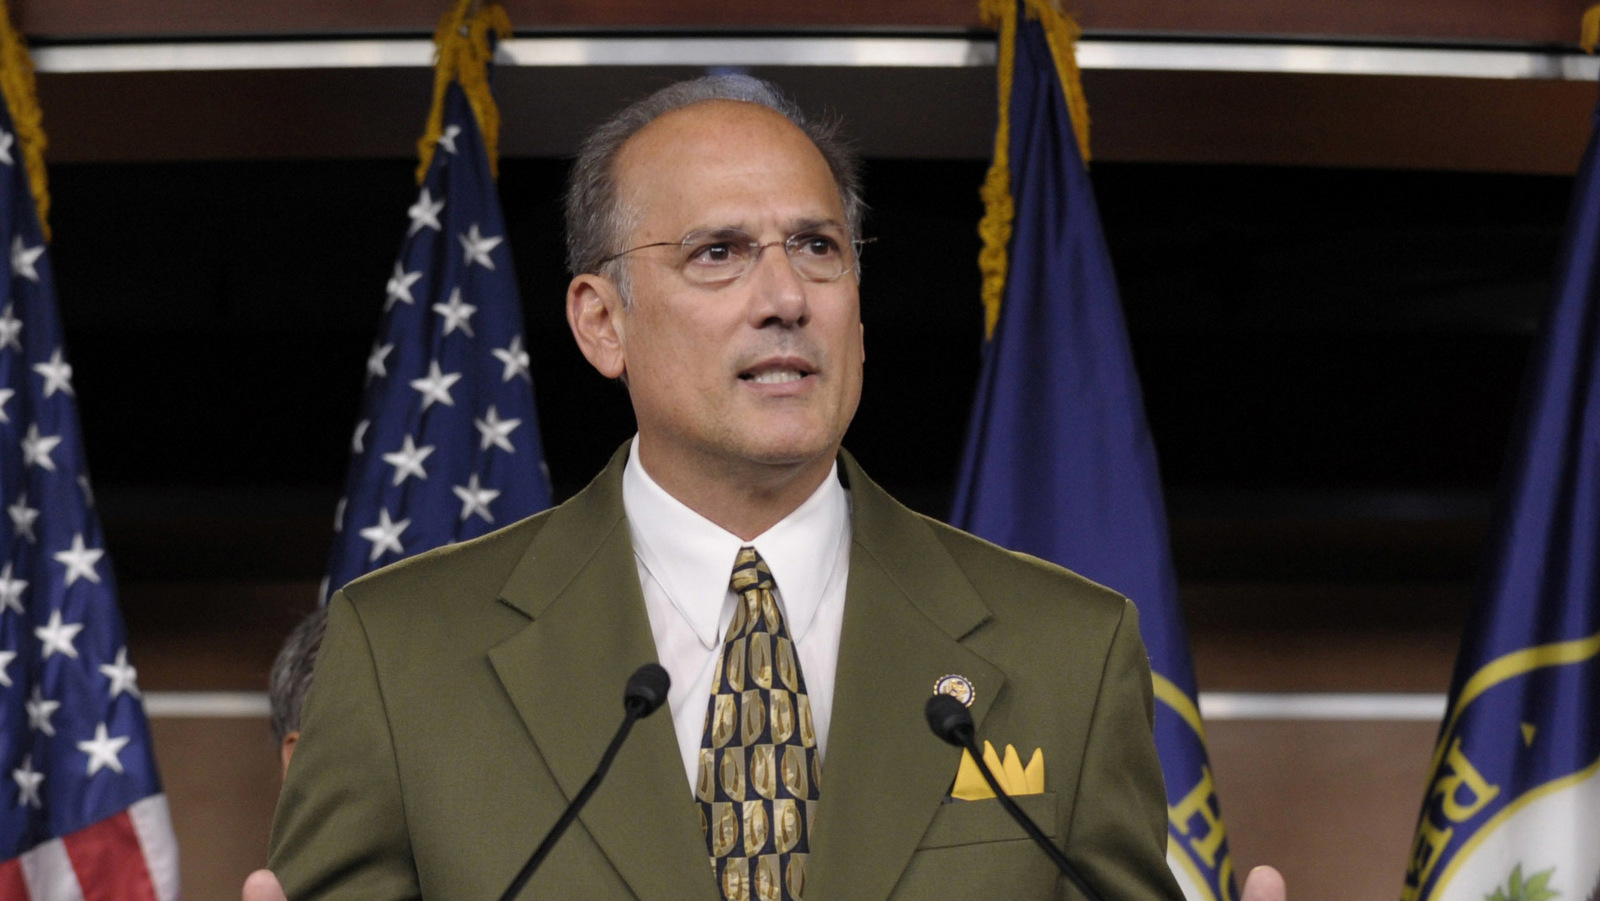 Rep. Thomas Marino, R-Pa., speaks during a news conference on Capitol Hill in Washington. Marino played a key role in passing a bill weakening the Drug Enforcement Administration's authority to stop companies from distributing opioids, Sept. 23, 2011. (AP/Susan Walsh)